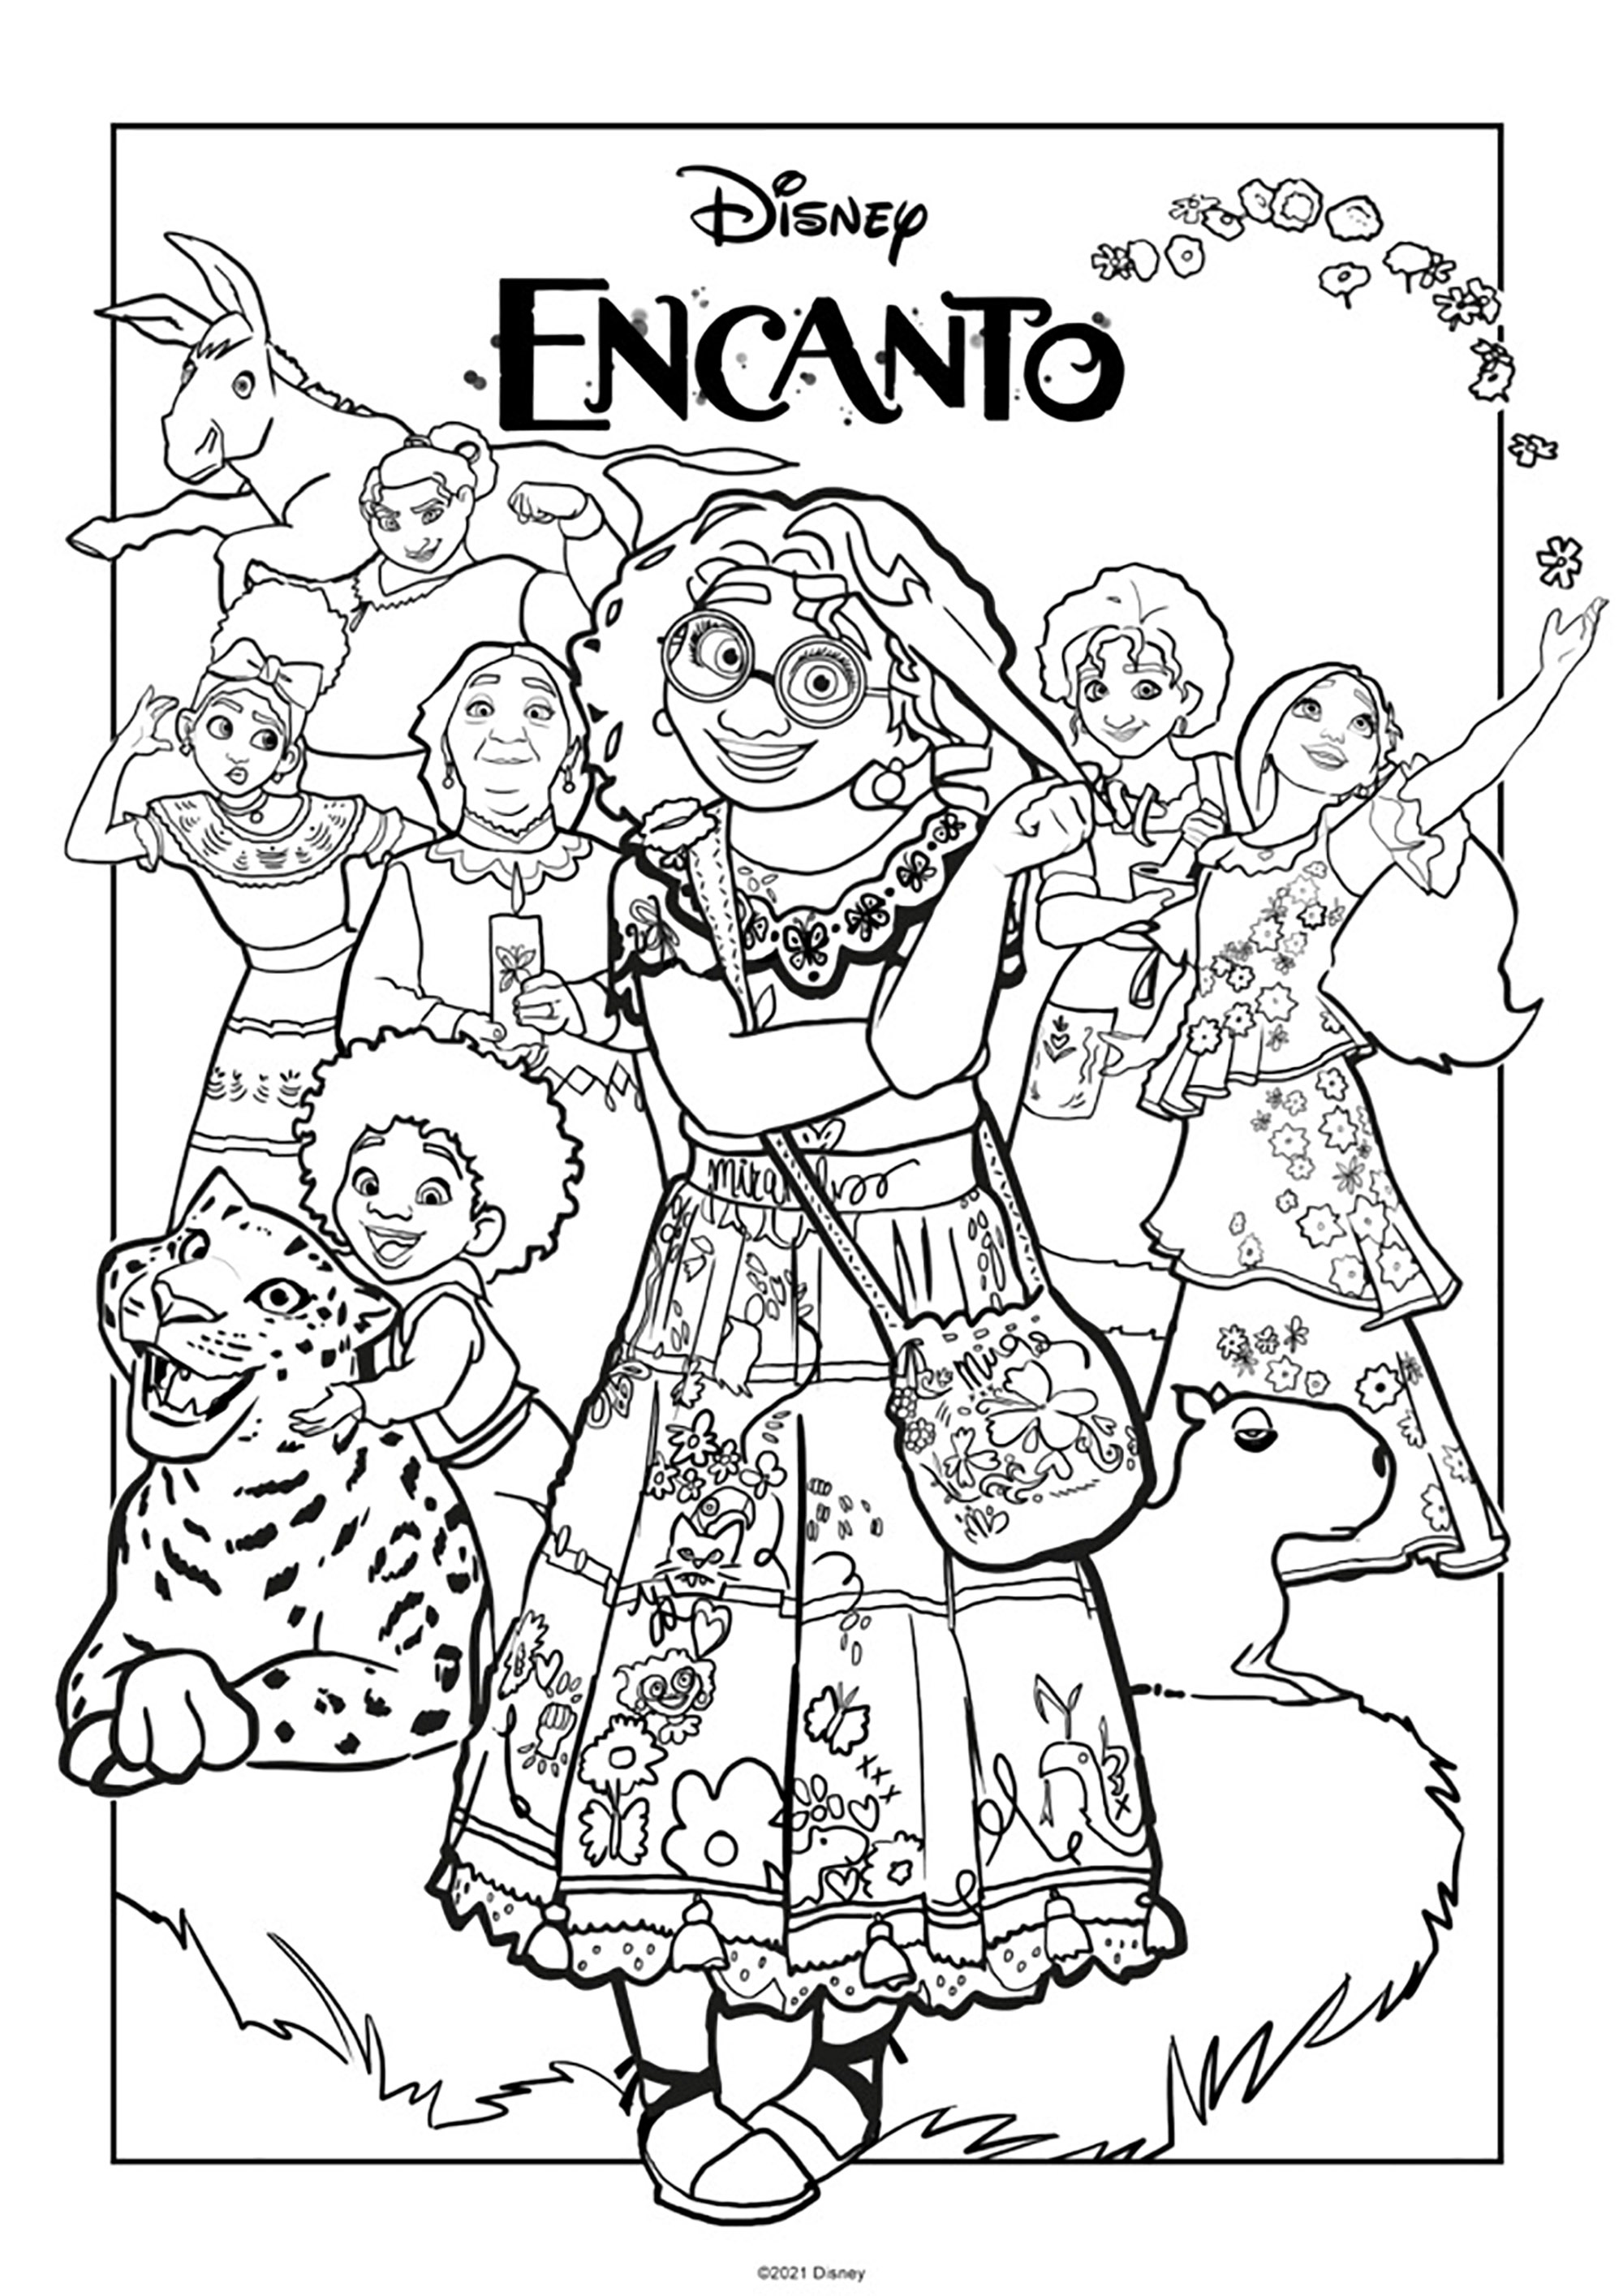 Encanto coloring pages: Mirabel Madrigal and other characters from